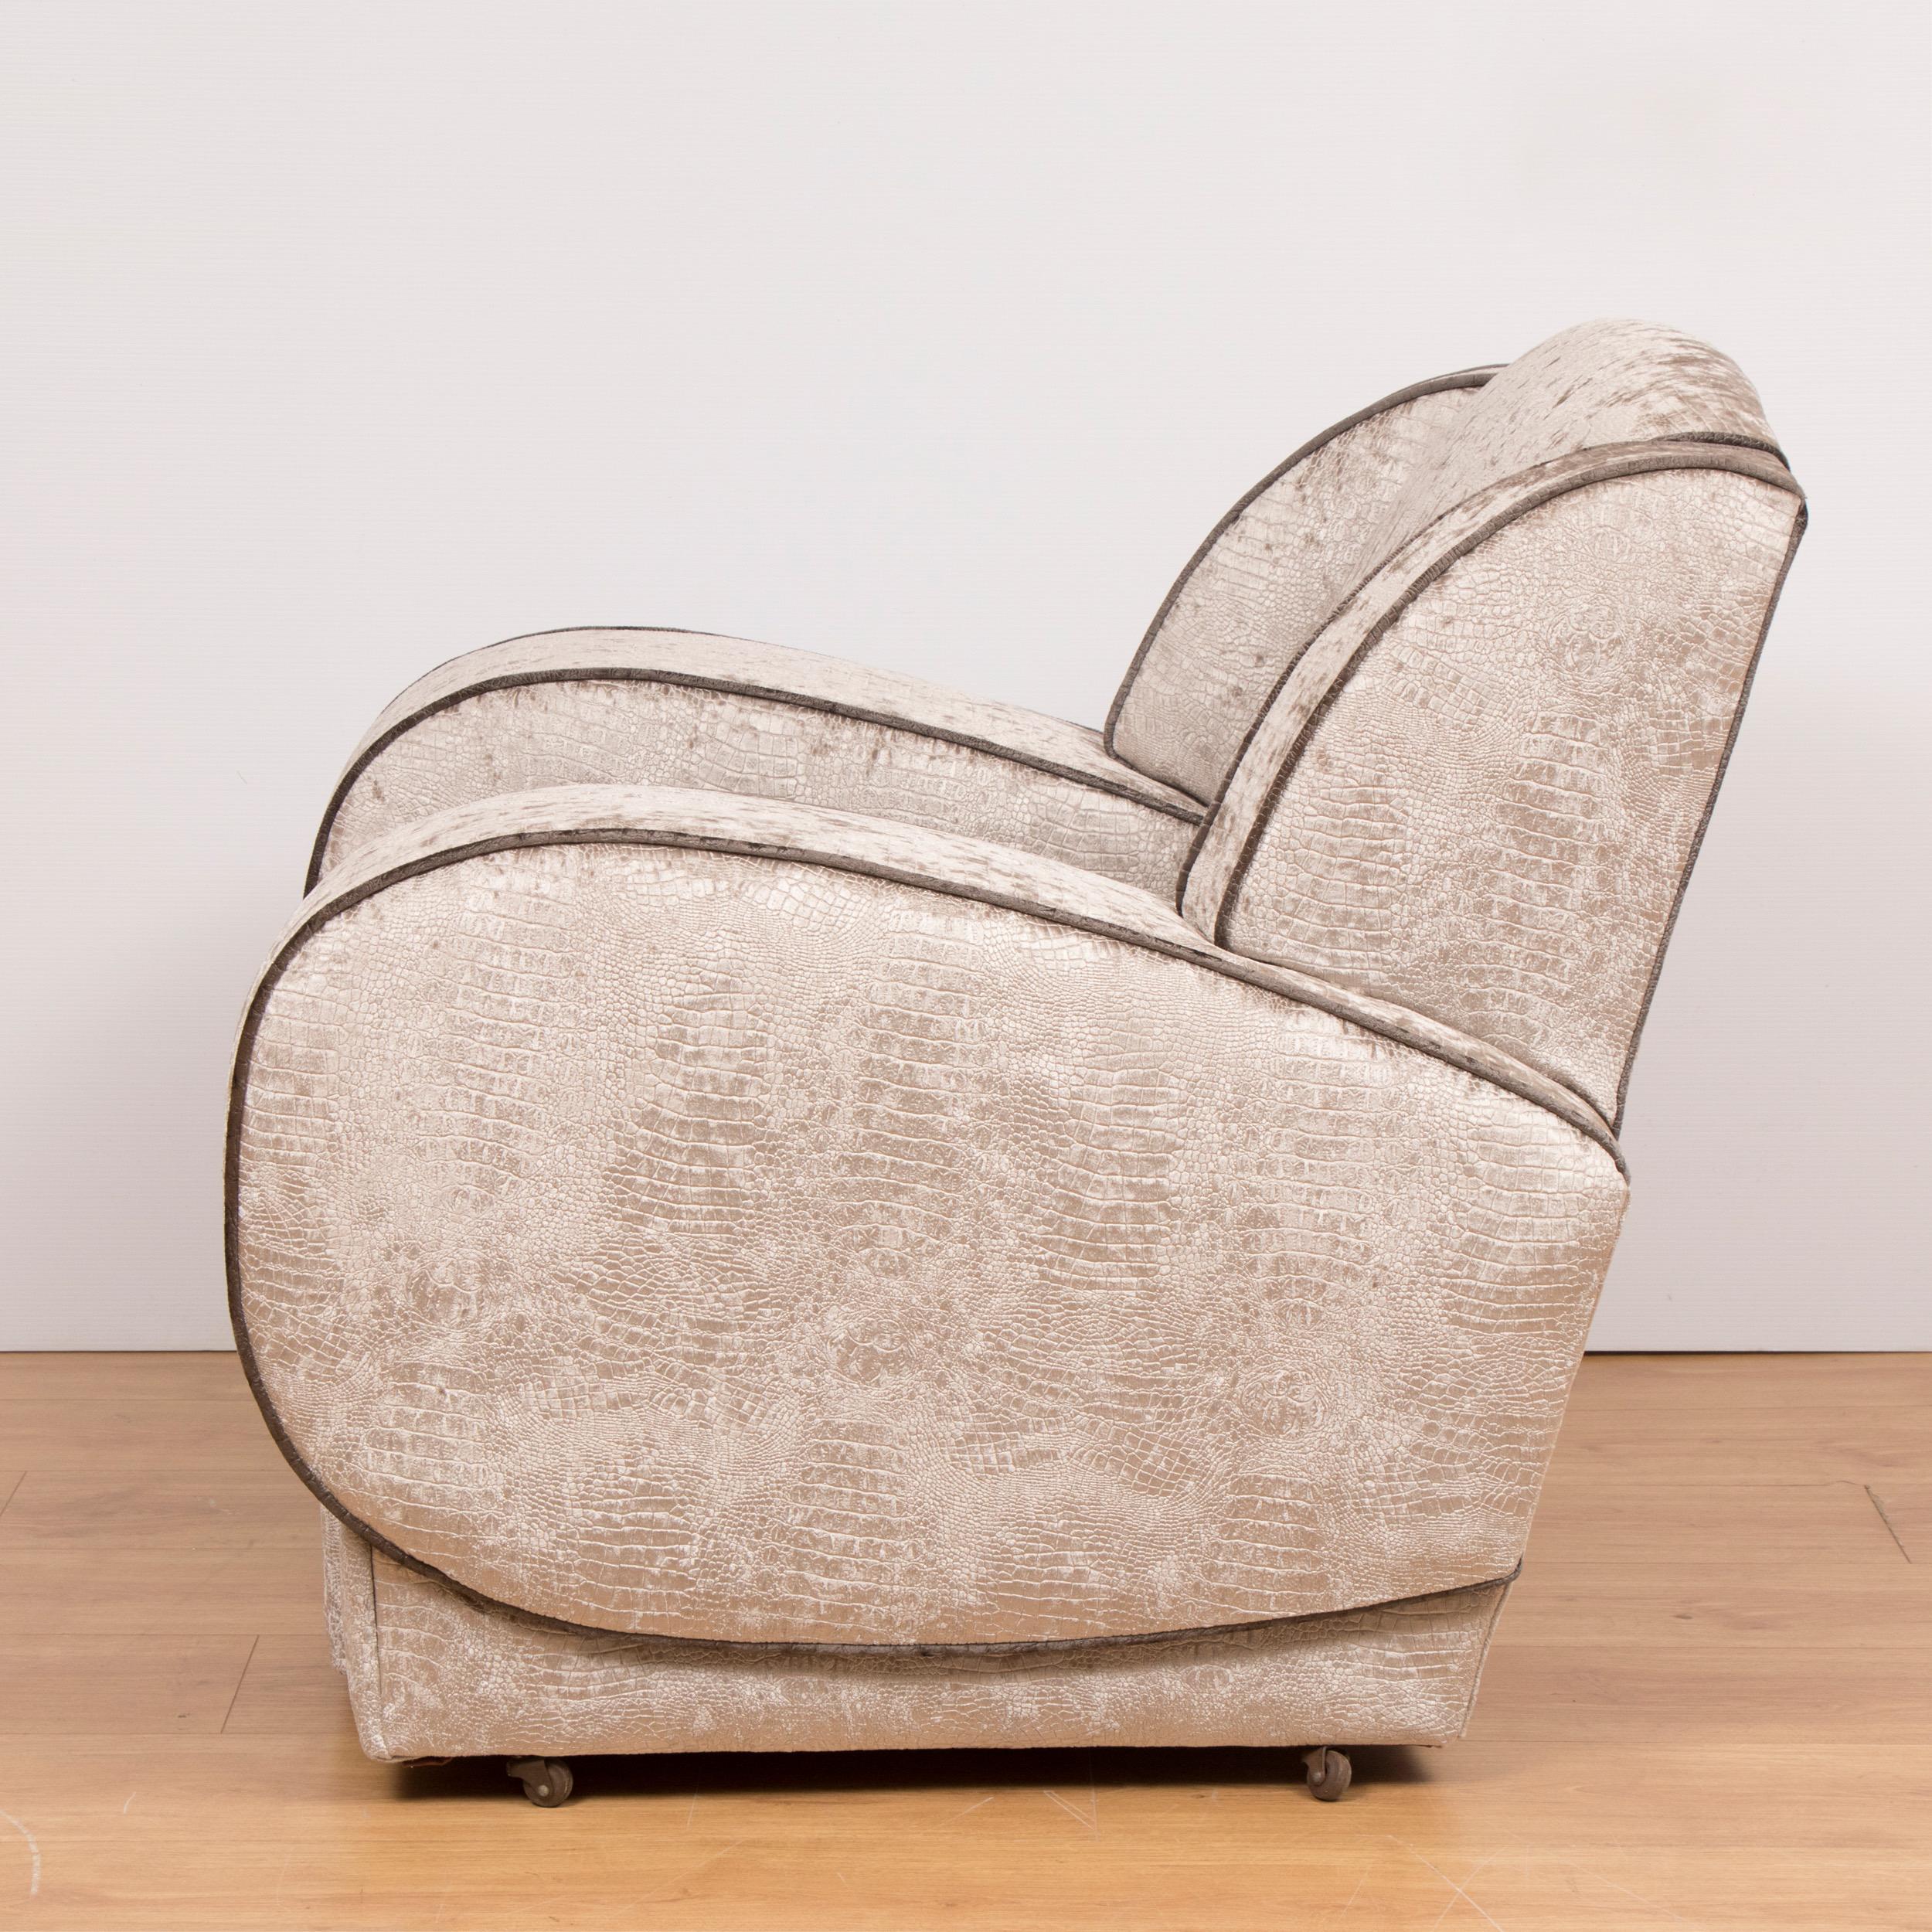 British Art Deco Armchairs Newly Upholstered in a Snakeskin Style Fabric For Sale 1